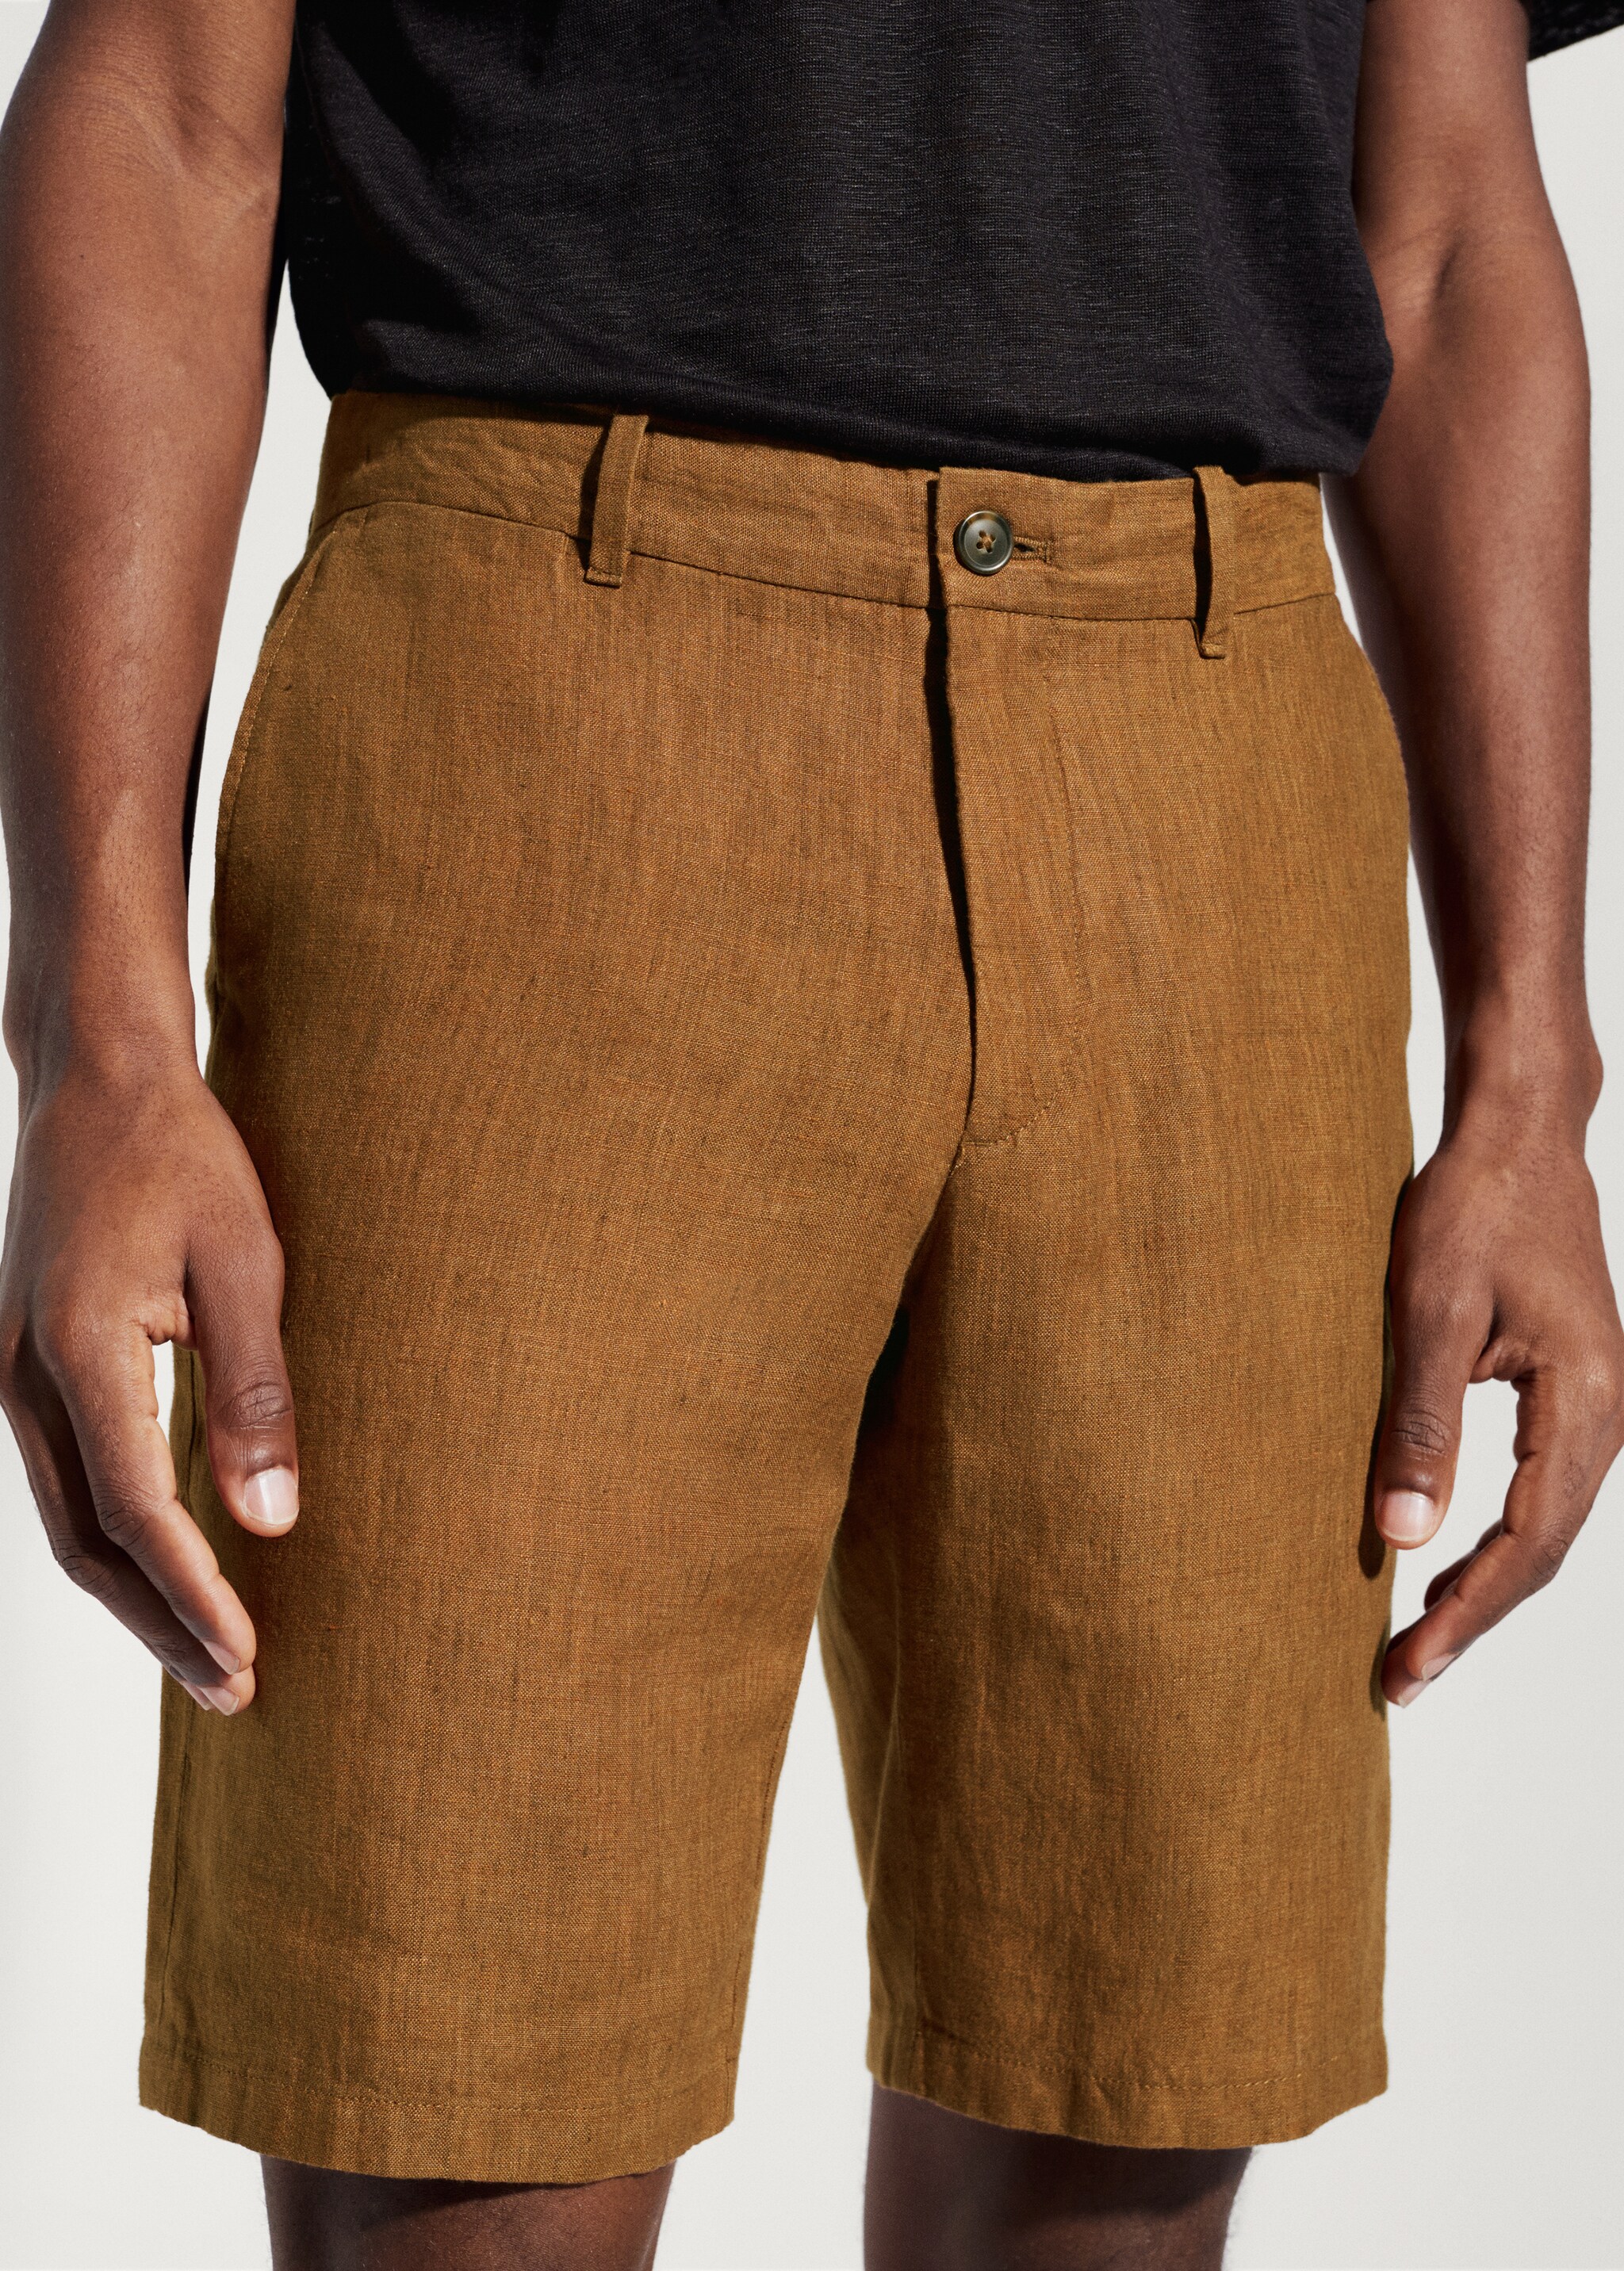 100% linen bermuda shorts - Details of the article 1